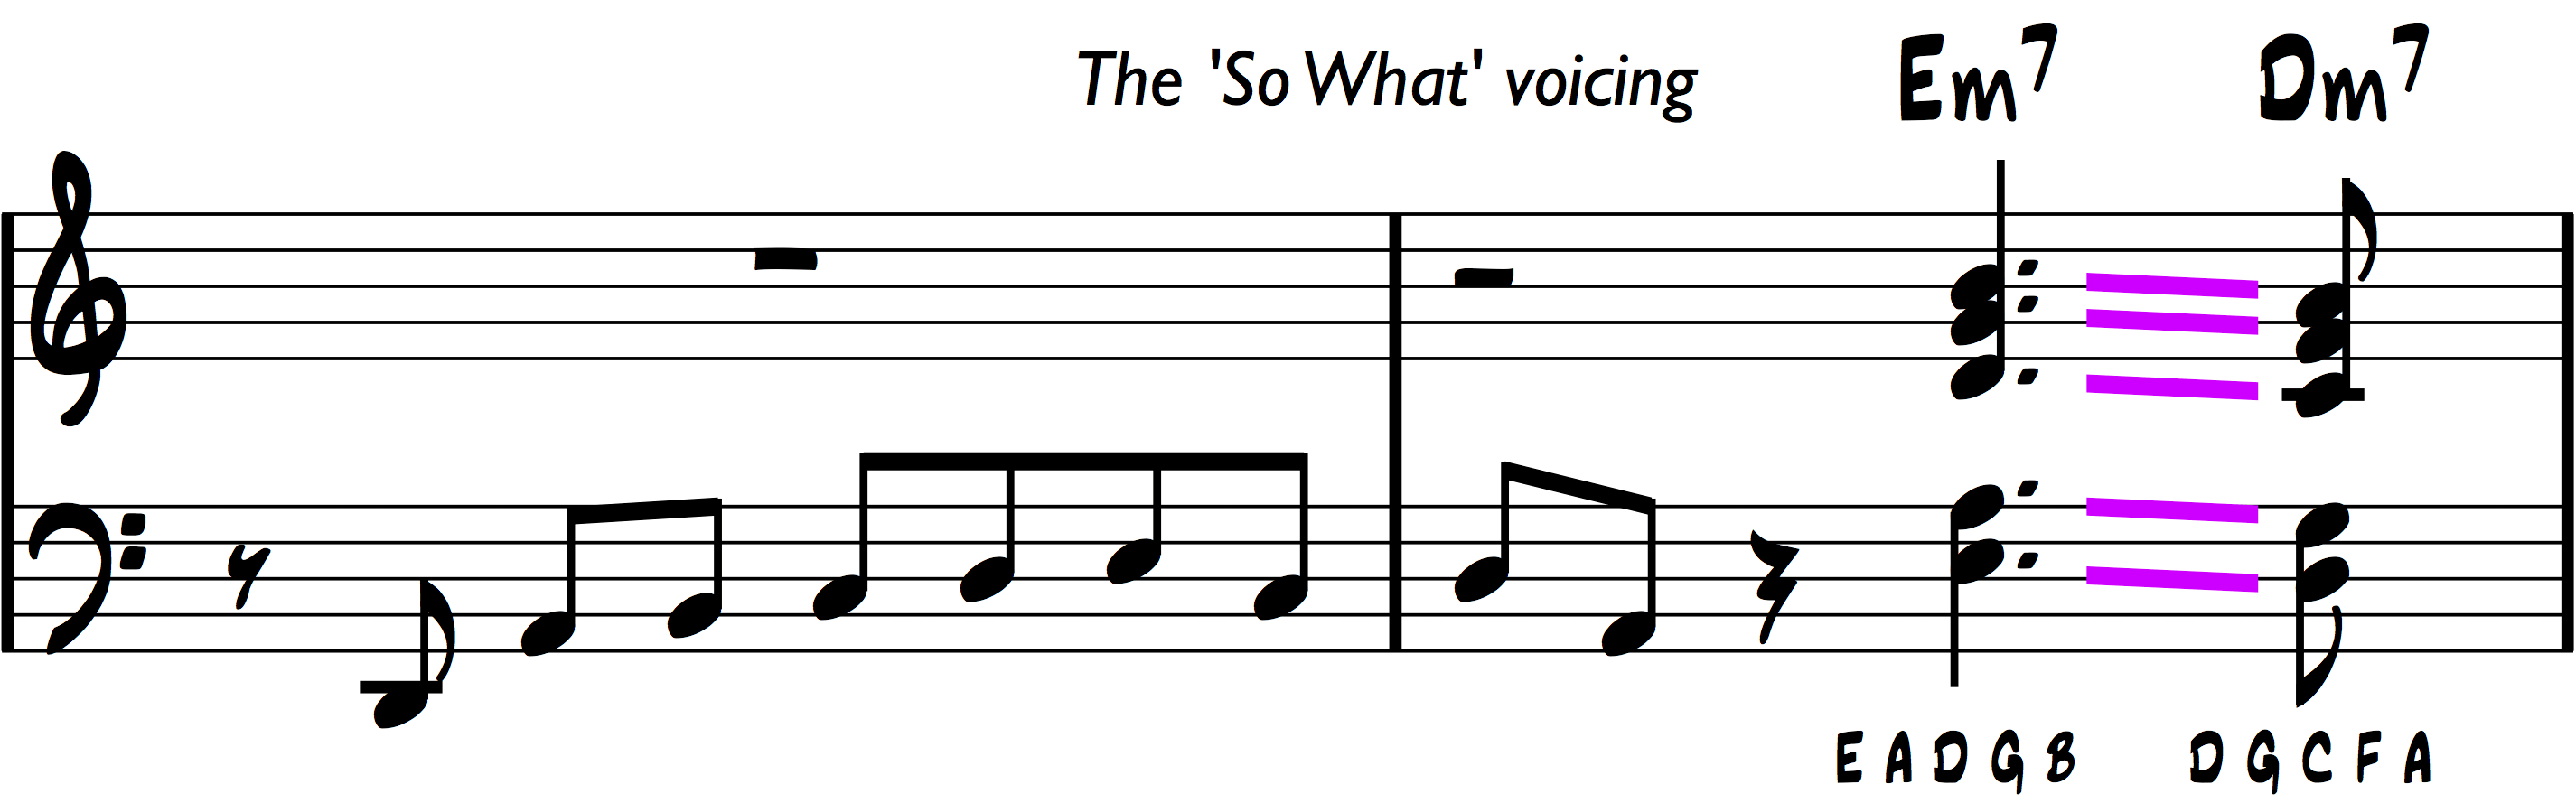 The 'So What' Voicing by Bill Evans | Jazz Tutorial